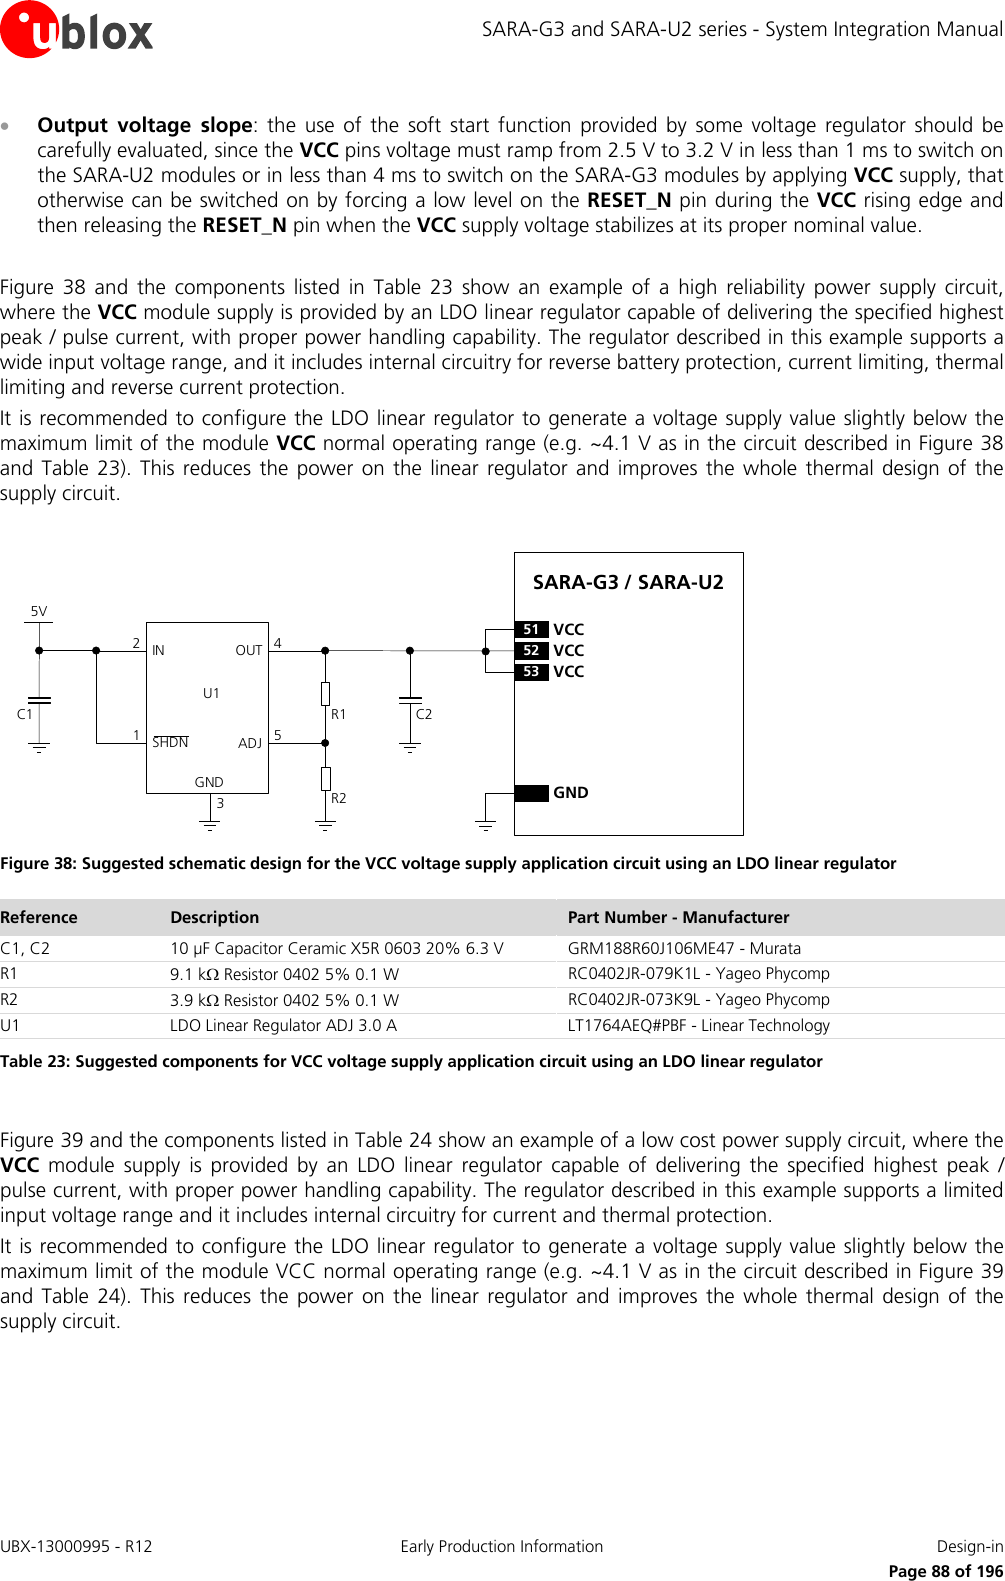 SARA-G3 and SARA-U2 series - System Integration Manual • Output voltage slope: the use of the soft start function provided by some voltage regulator should be carefully evaluated, since the VCC pins voltage must ramp from 2.5 V to 3.2 V in less than 1 ms to switch on the SARA-U2 modules or in less than 4 ms to switch on the SARA-G3 modules by applying VCC supply, that otherwise can be switched on by forcing a low level on the RESET_N pin during the VCC rising edge and then releasing the RESET_N pin when the VCC supply voltage stabilizes at its proper nominal value.  Figure  38 and  the components listed in  Table  23 show  an example of a high reliability power supply circuit, where the VCC module supply is provided by an LDO linear regulator capable of delivering the specified highest peak / pulse current, with proper power handling capability. The regulator described in this example supports a wide input voltage range, and it includes internal circuitry for reverse battery protection, current limiting, thermal limiting and reverse current protection. It is recommended to configure the LDO linear regulator to generate a voltage supply value slightly below the maximum limit of the module VCC normal operating range (e.g. ~4.1 V as in the circuit described in Figure 38 and  Table 23).  This reduces  the power on the linear regulator and improves  the  whole  thermal design of the supply circuit.  5VC1IN OUTADJGND12453C2R1R2U1SHDNSARA-G3 / SARA-U252VCC53VCC51VCCGND Figure 38: Suggested schematic design for the VCC voltage supply application circuit using an LDO linear regulator Reference Description Part Number - Manufacturer C1, C2 10 µF Capacitor Ceramic X5R 0603 20% 6.3 V GRM188R60J106ME47 - Murata R1 9.1 kΩ Resistor 0402 5% 0.1 W RC0402JR-079K1L - Yageo Phycomp R2 3.9 kΩ Resistor 0402 5% 0.1 W RC0402JR-073K9L - Yageo Phycomp U1 LDO Linear Regulator ADJ 3.0 A LT1764AEQ#PBF - Linear Technology Table 23: Suggested components for VCC voltage supply application circuit using an LDO linear regulator  Figure 39 and the components listed in Table 24 show an example of a low cost power supply circuit, where the VCC module  supply is provided by an LDO linear regulator capable of delivering the specified highest  peak / pulse current, with proper power handling capability. The regulator described in this example supports a limited input voltage range and it includes internal circuitry for current and thermal protection. It is recommended to configure the LDO linear regulator to generate a voltage supply value slightly below the maximum limit of the module VCC normal operating range (e.g. ~4.1 V as in the circuit described in Figure 39 and  Table 24). This reduces the power on the linear regulator and improves the whole thermal design of the supply circuit.  UBX-13000995 - R12 Early Production Information Design-in     Page 88 of 196 